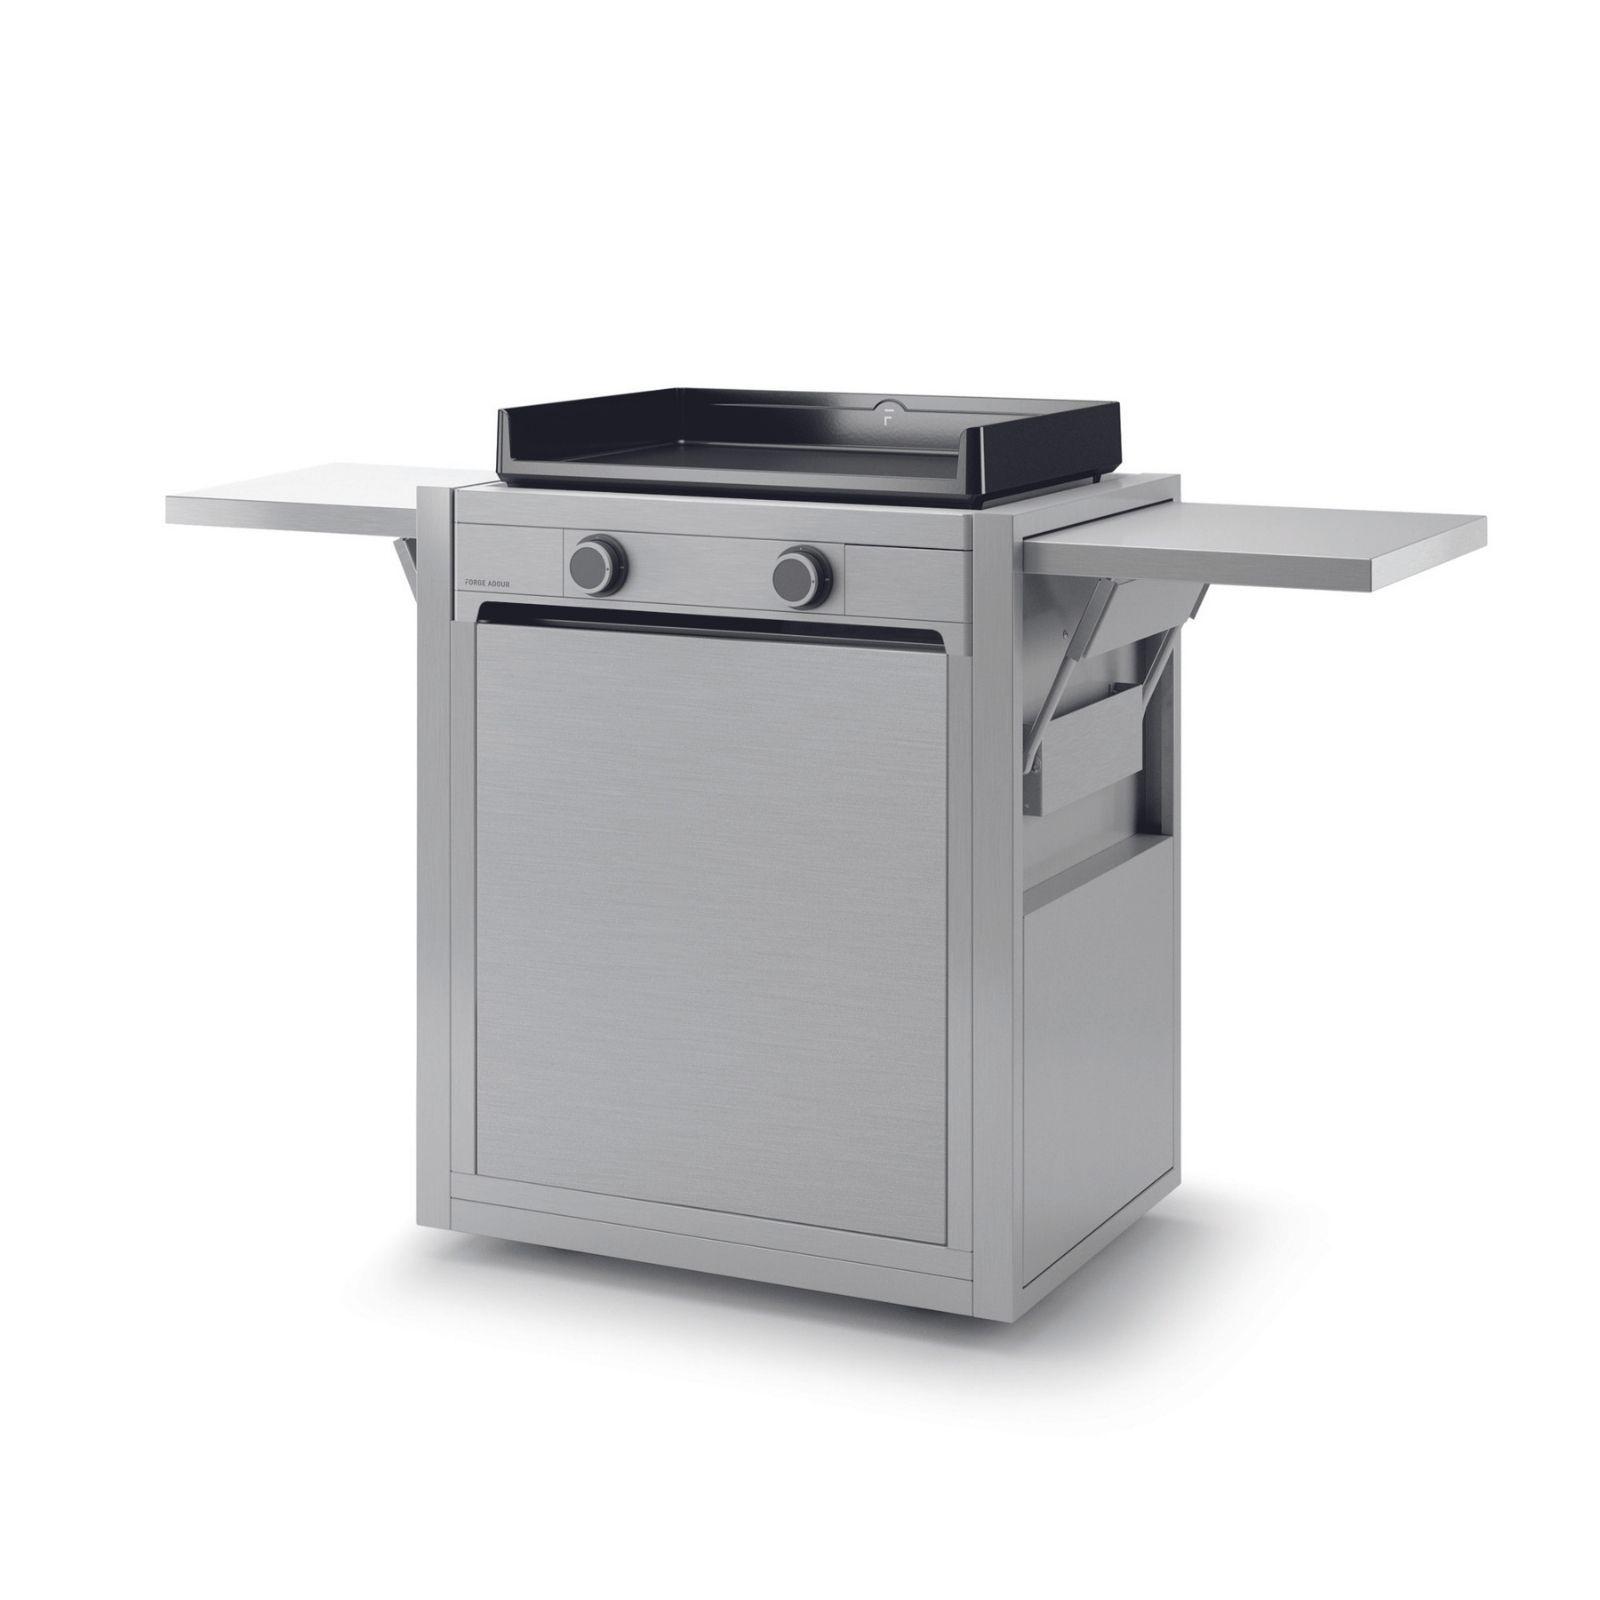 chariot-modern-60-inox-forge-adour-2